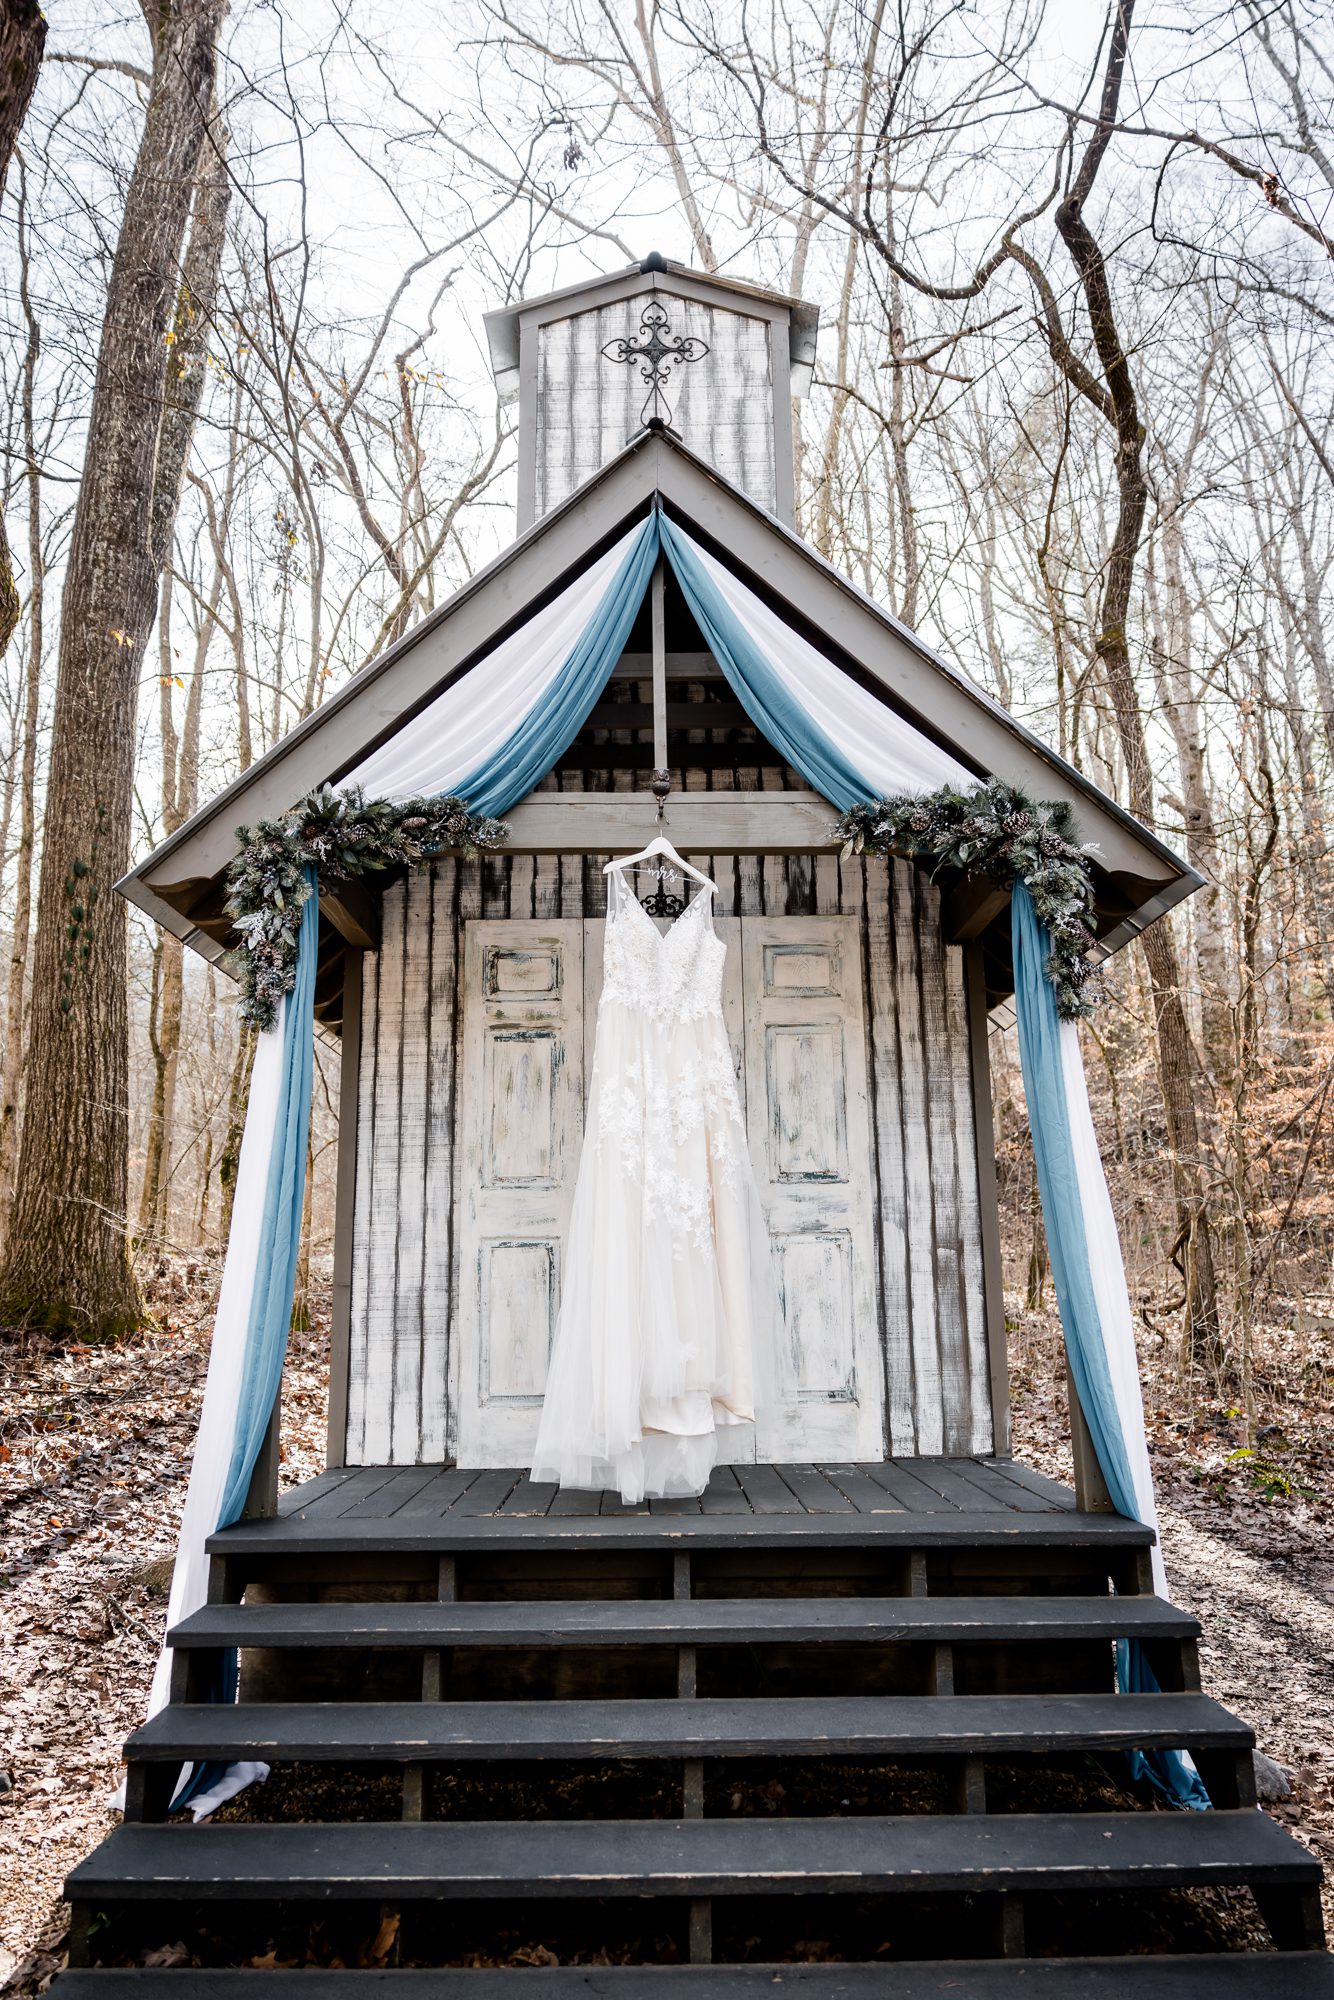 Outdoor Elopement in the Smoky Mountains